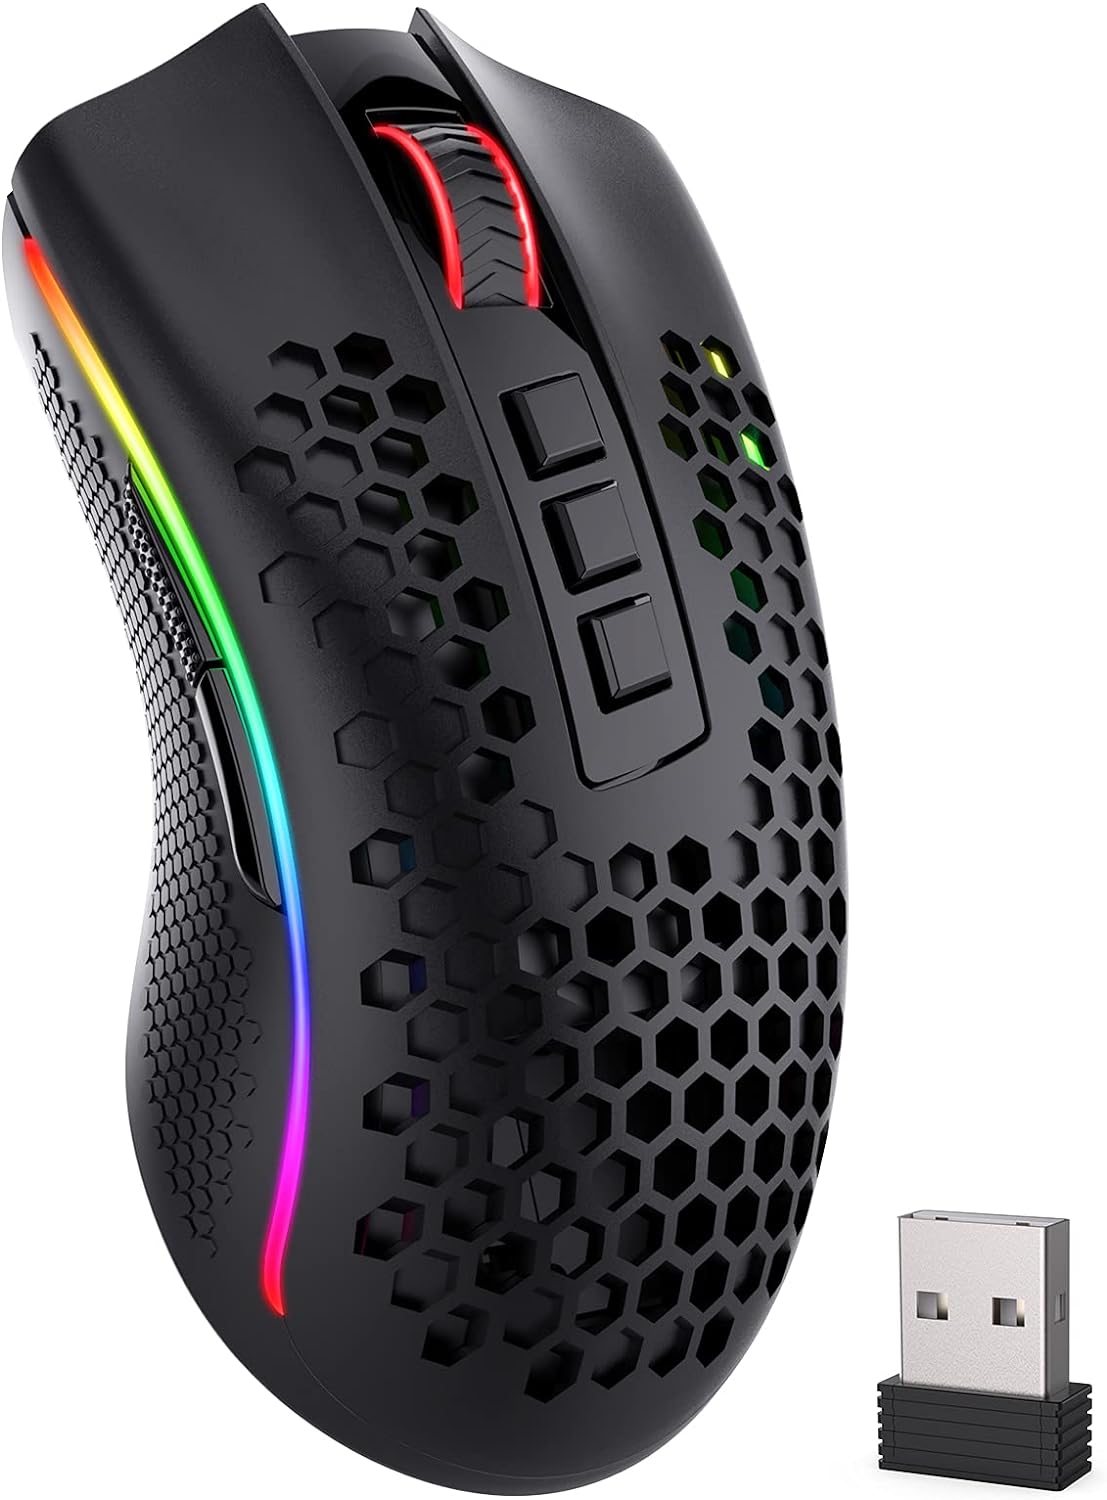 Redragon M808 Storm Pro Wireless Gaming Mouse, RGB Honeycomb Form - 16,000 DPI Optical Sensor - 7 Programmable Buttons - Precise